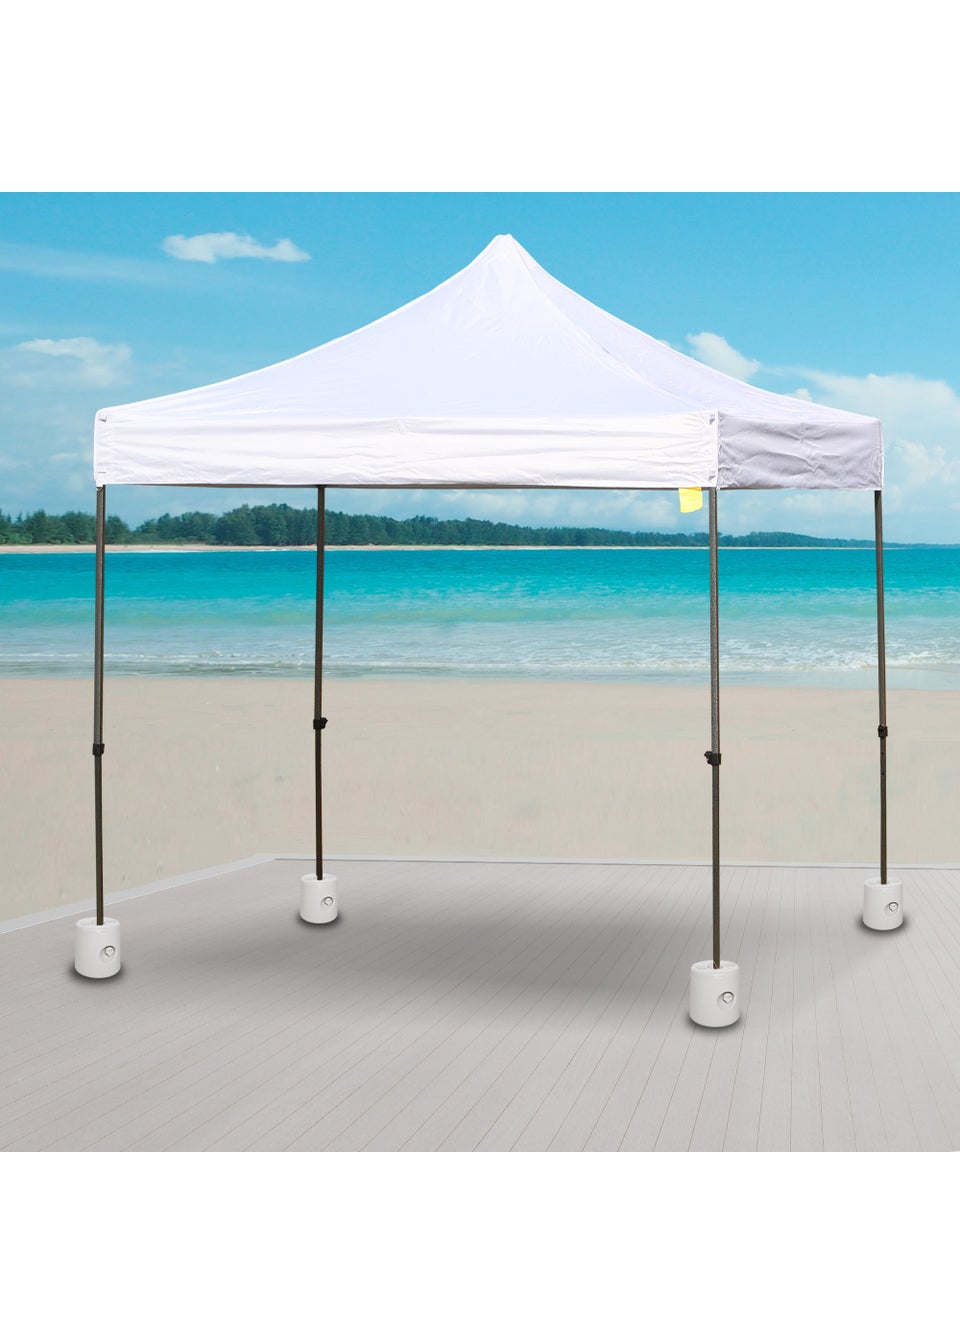 Outsunny 4pc Canopy Tent Weight Rapid Clip Gazebo Feet Fill with Water or Sand White